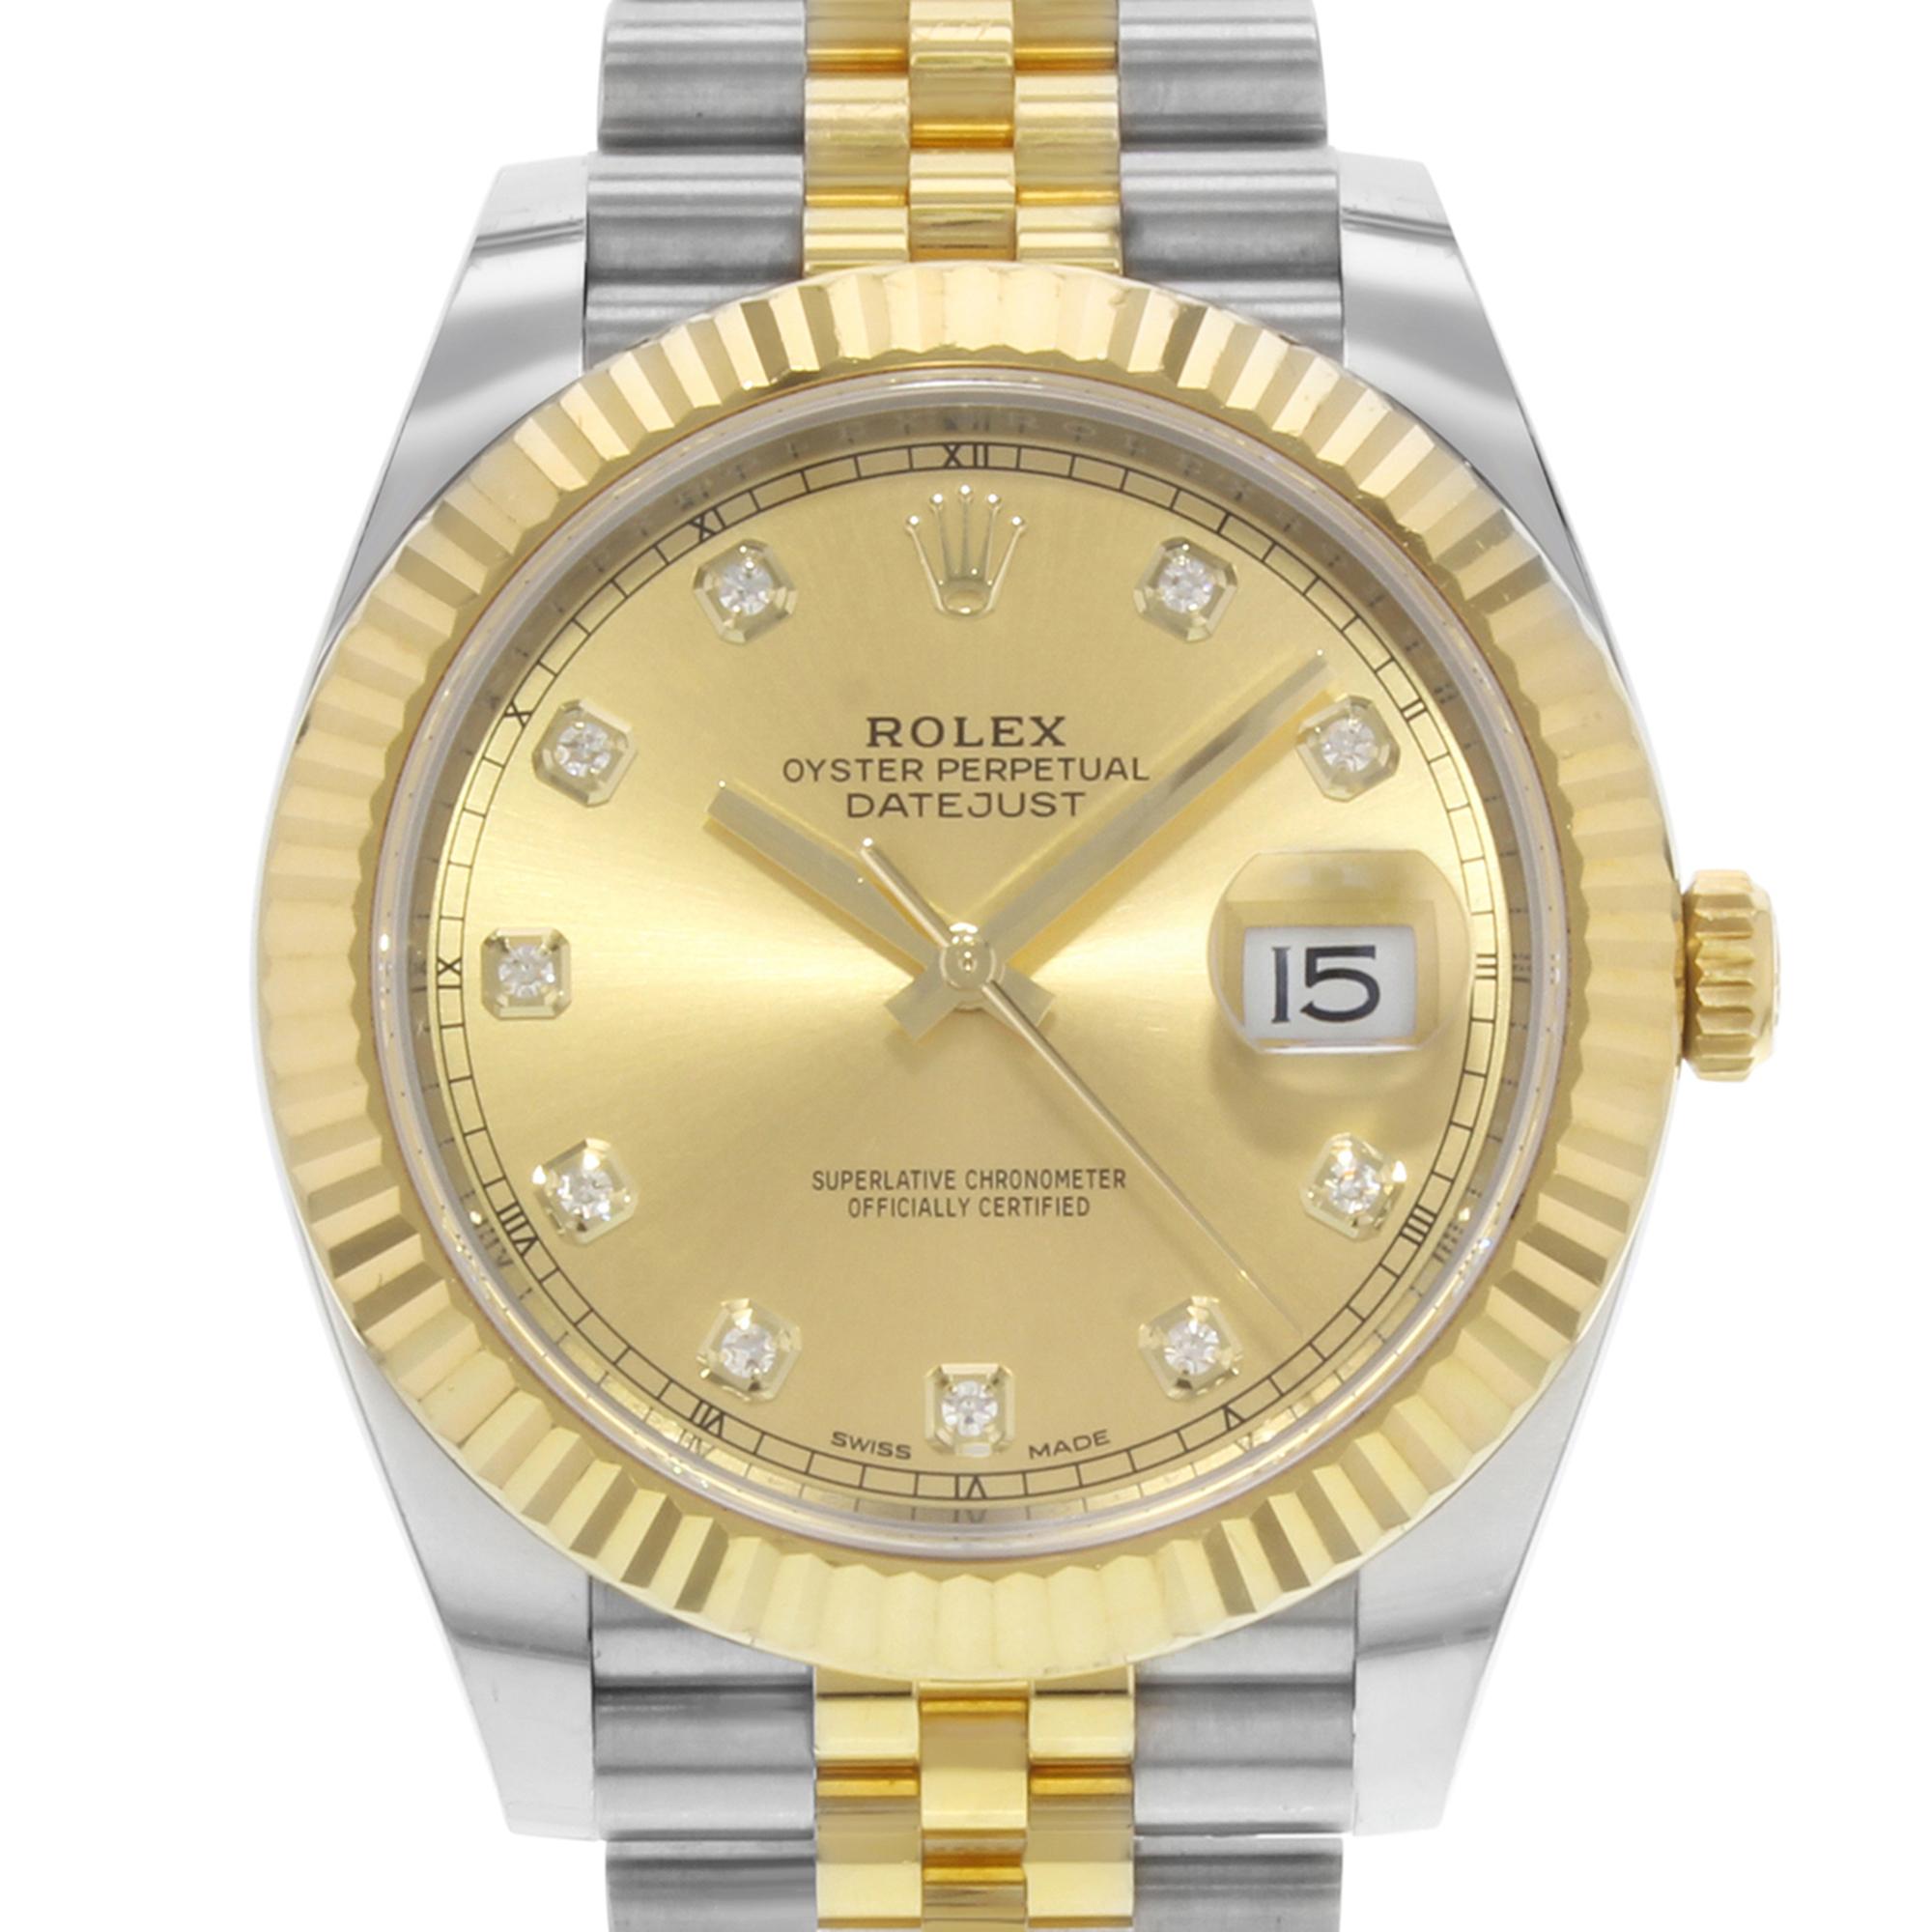 This brand new Rolex Datejust 41 126333 is a beautiful men's timepiece that is powered by mechanical (automatic) movement which is cased in a stainless steel case. It has a round shape face, date indicator, diamonds dial and has hand sticks style